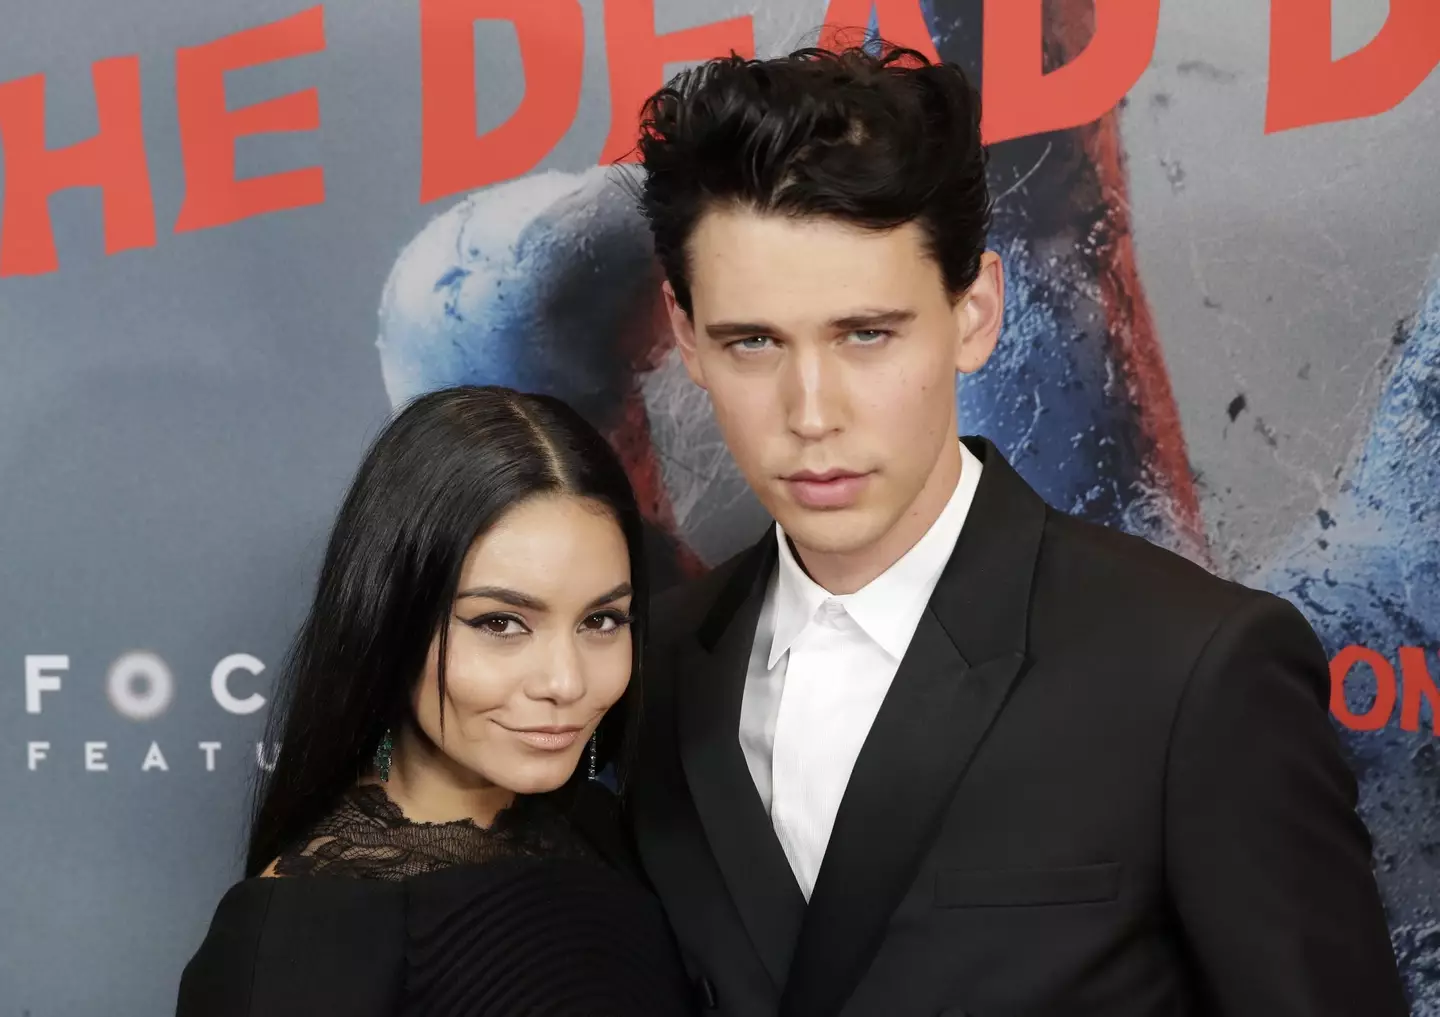 Vanessa Hudgens and Austin Butler were together for 8 years before splitting in 2020.